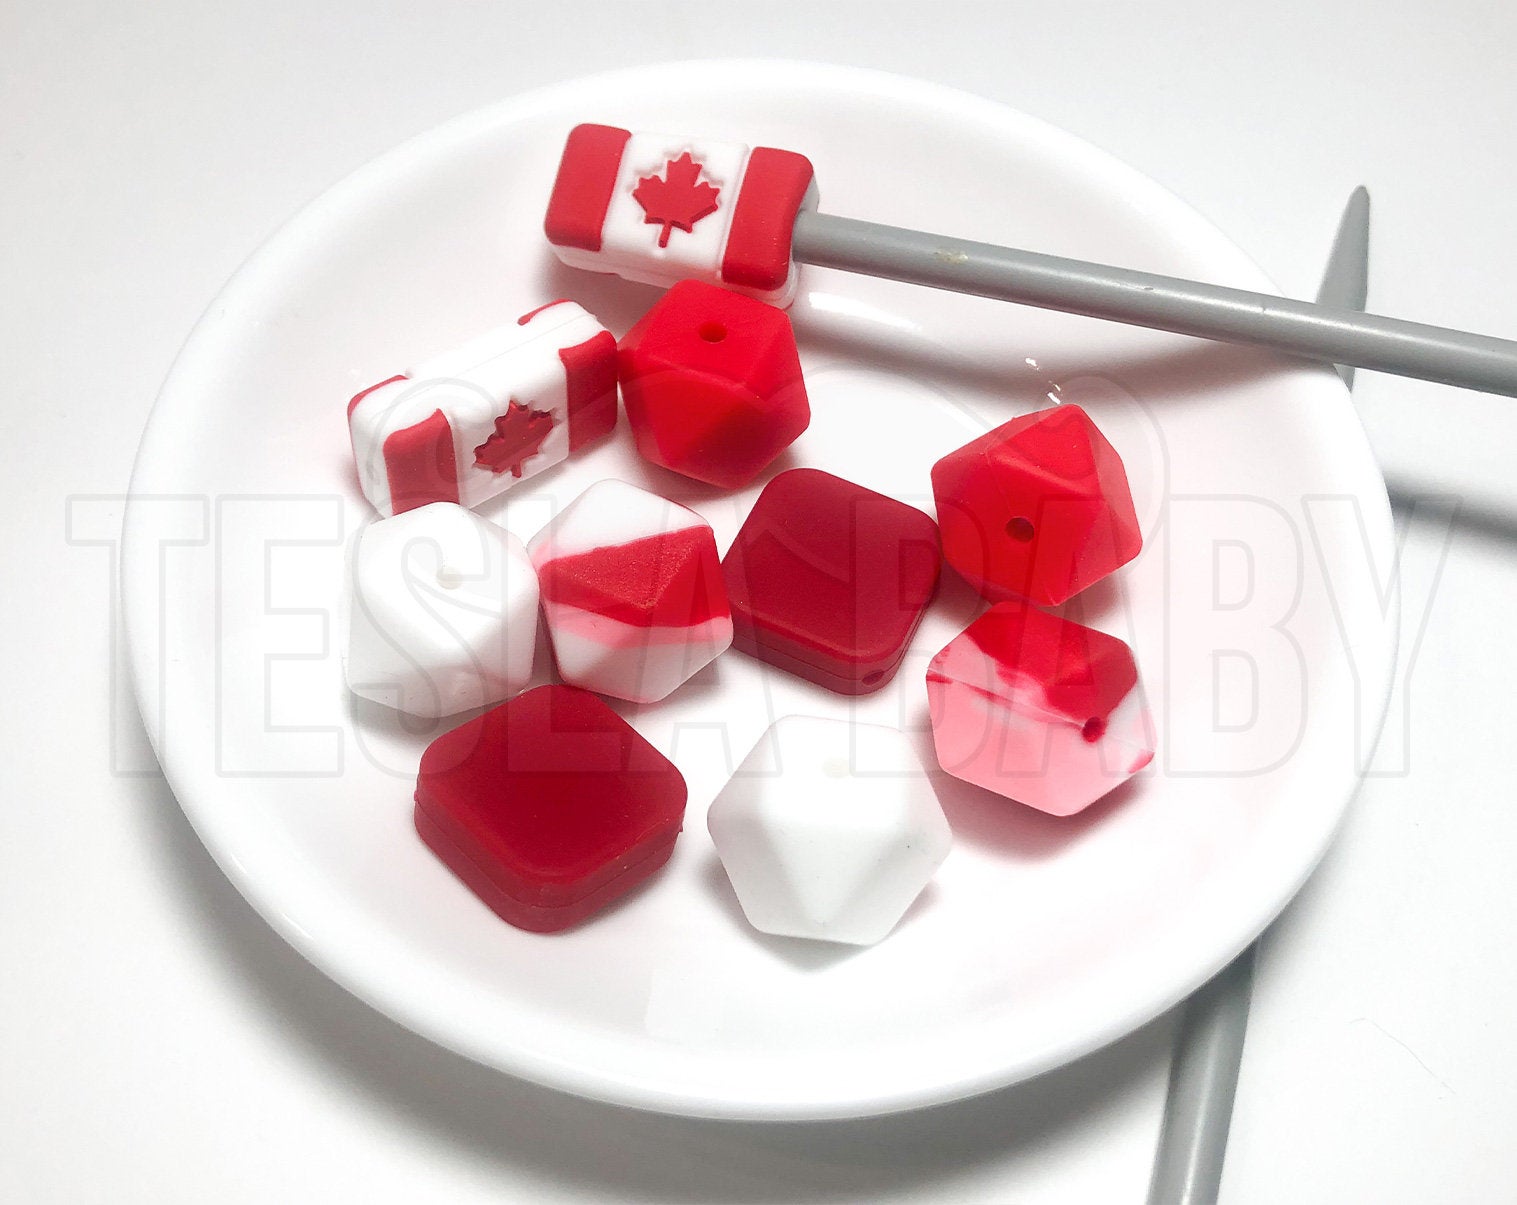 Knitting Needle Stoppers - Canadian - Beader Caps - Beader Tips - Back Stoppers - Point Protectors - End Stoppers - Stitch Holder